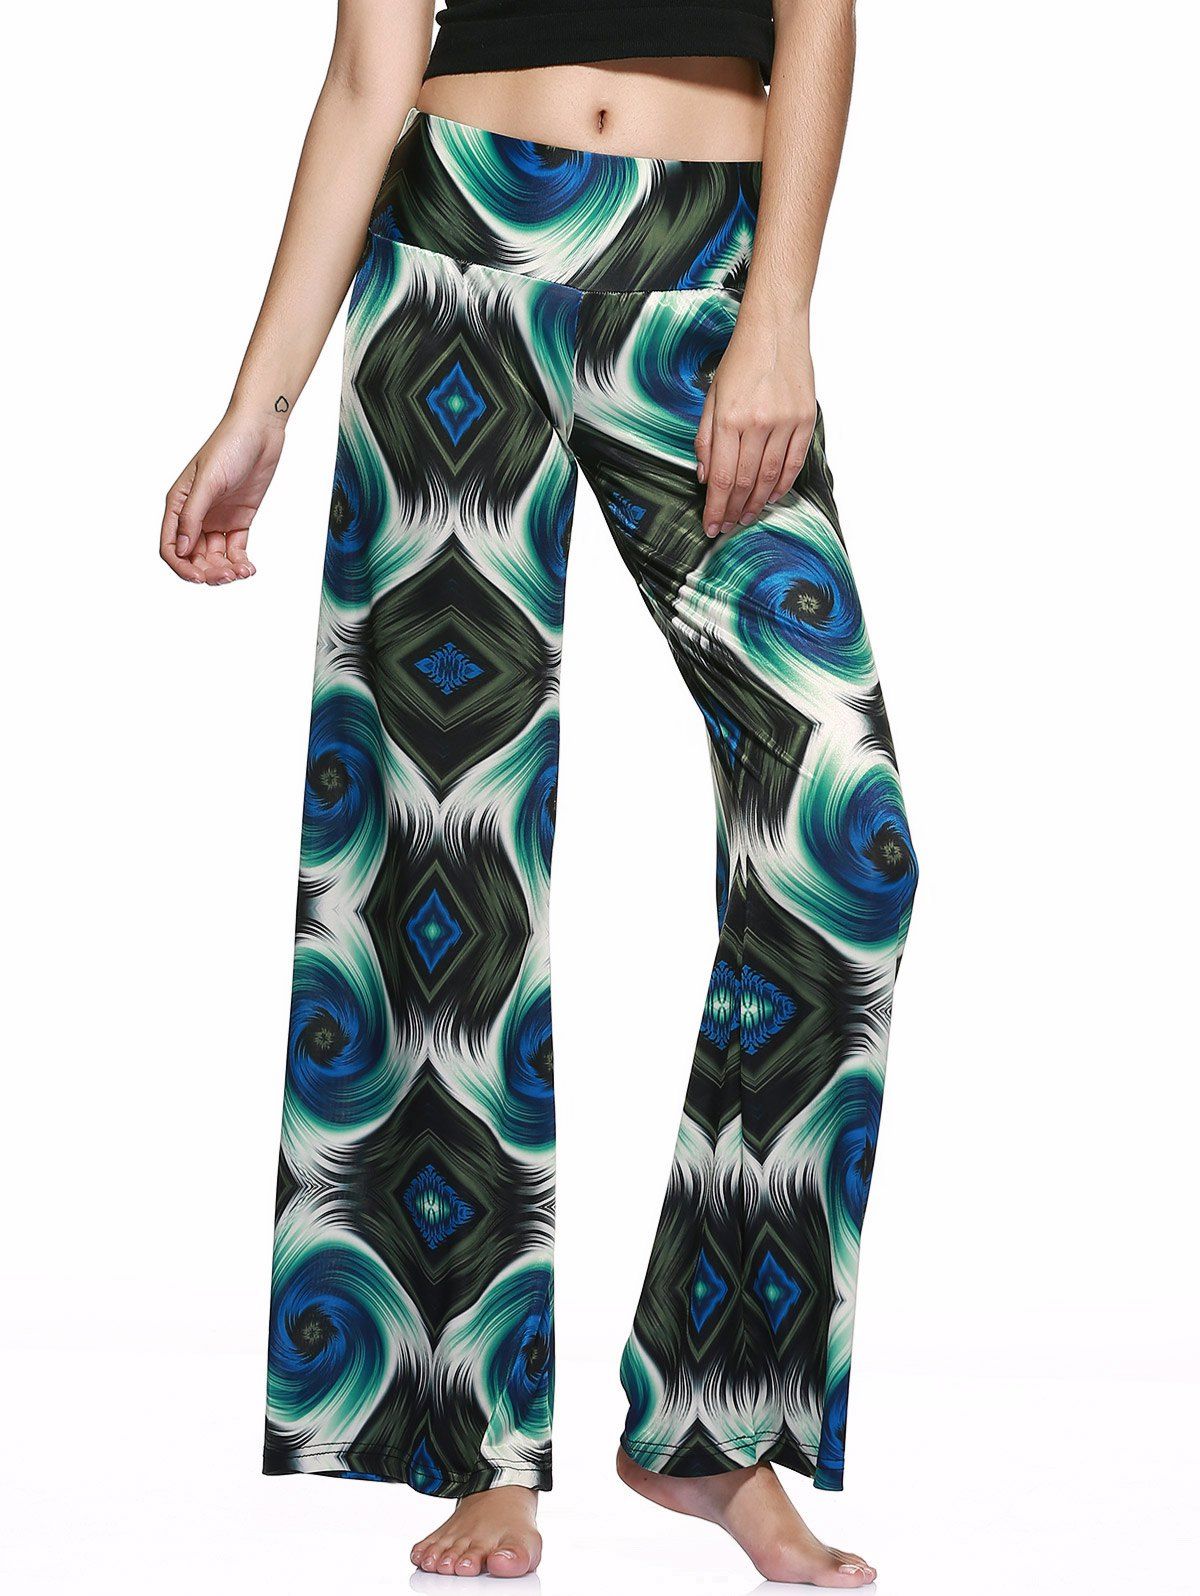 Casual Style Elastic Waist Printed Loose-Fitting Pants For Women, GREEN ...